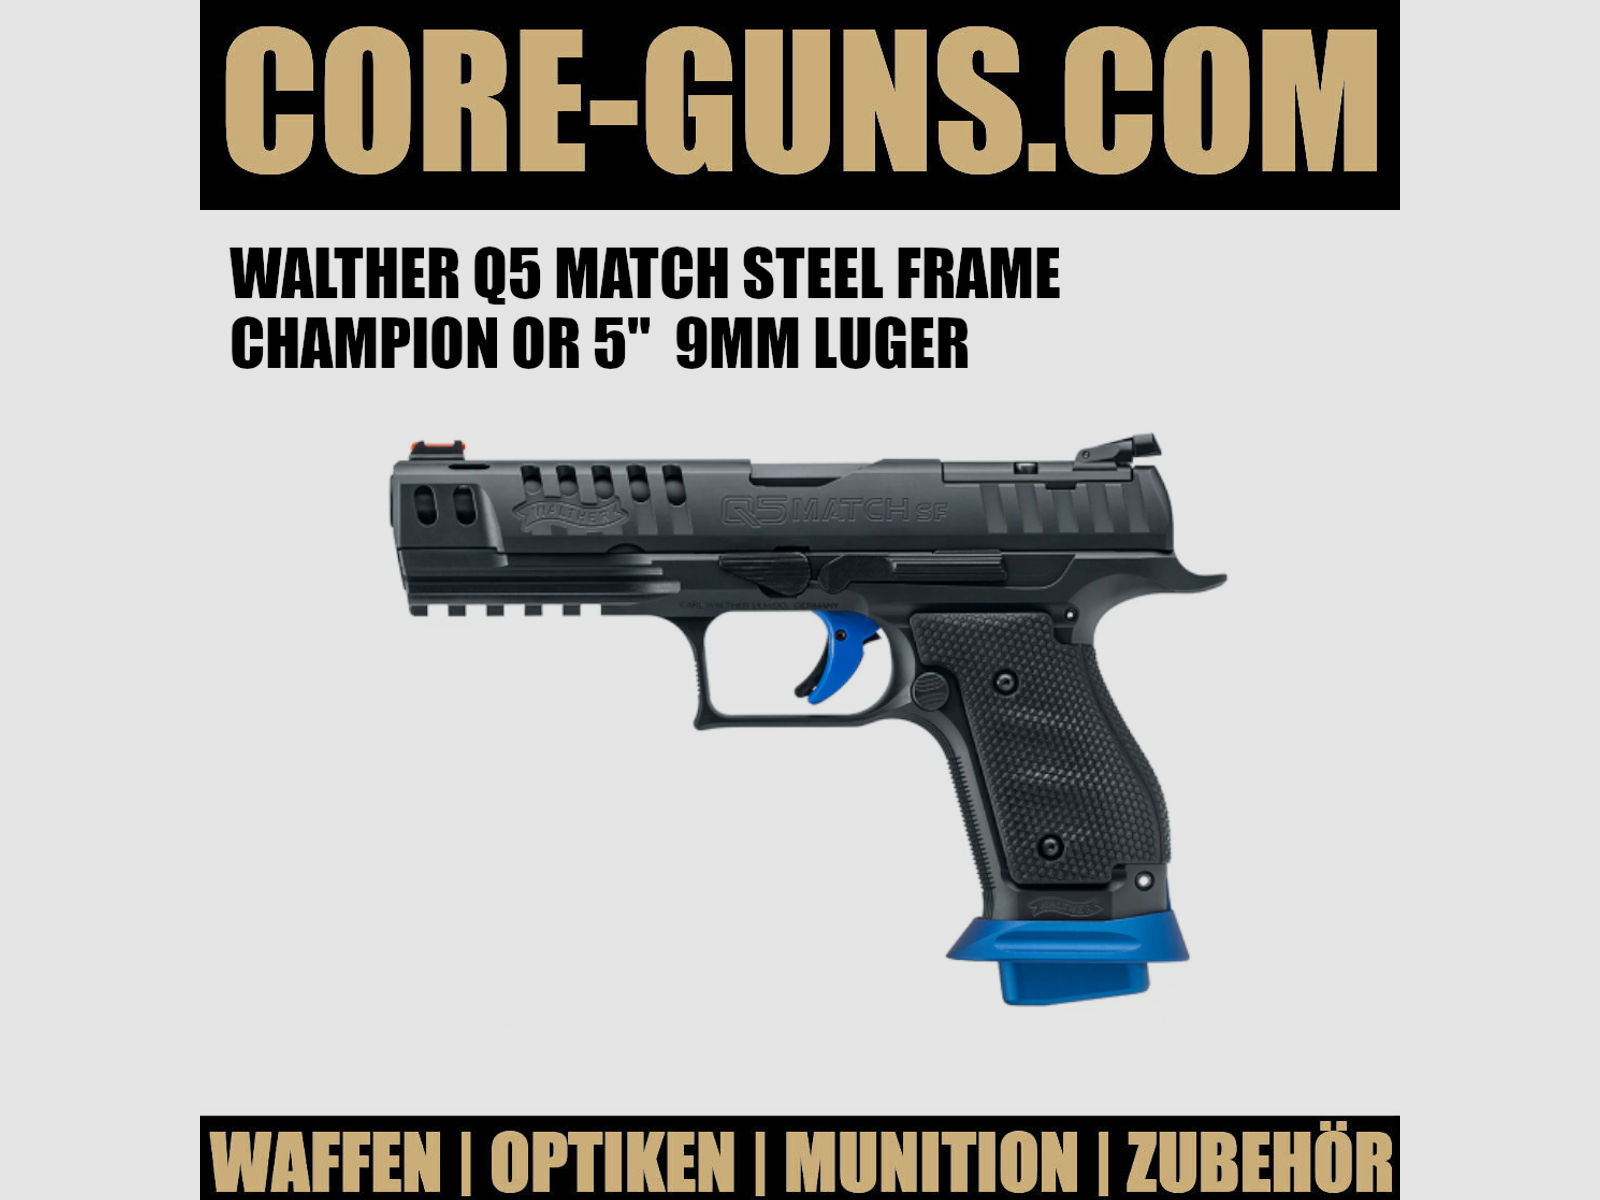 WALTHER Q5 MATCH STEEL FRAME CHAMPION OR 5" SELBSTLADEPISTOLE 9MM LUGER